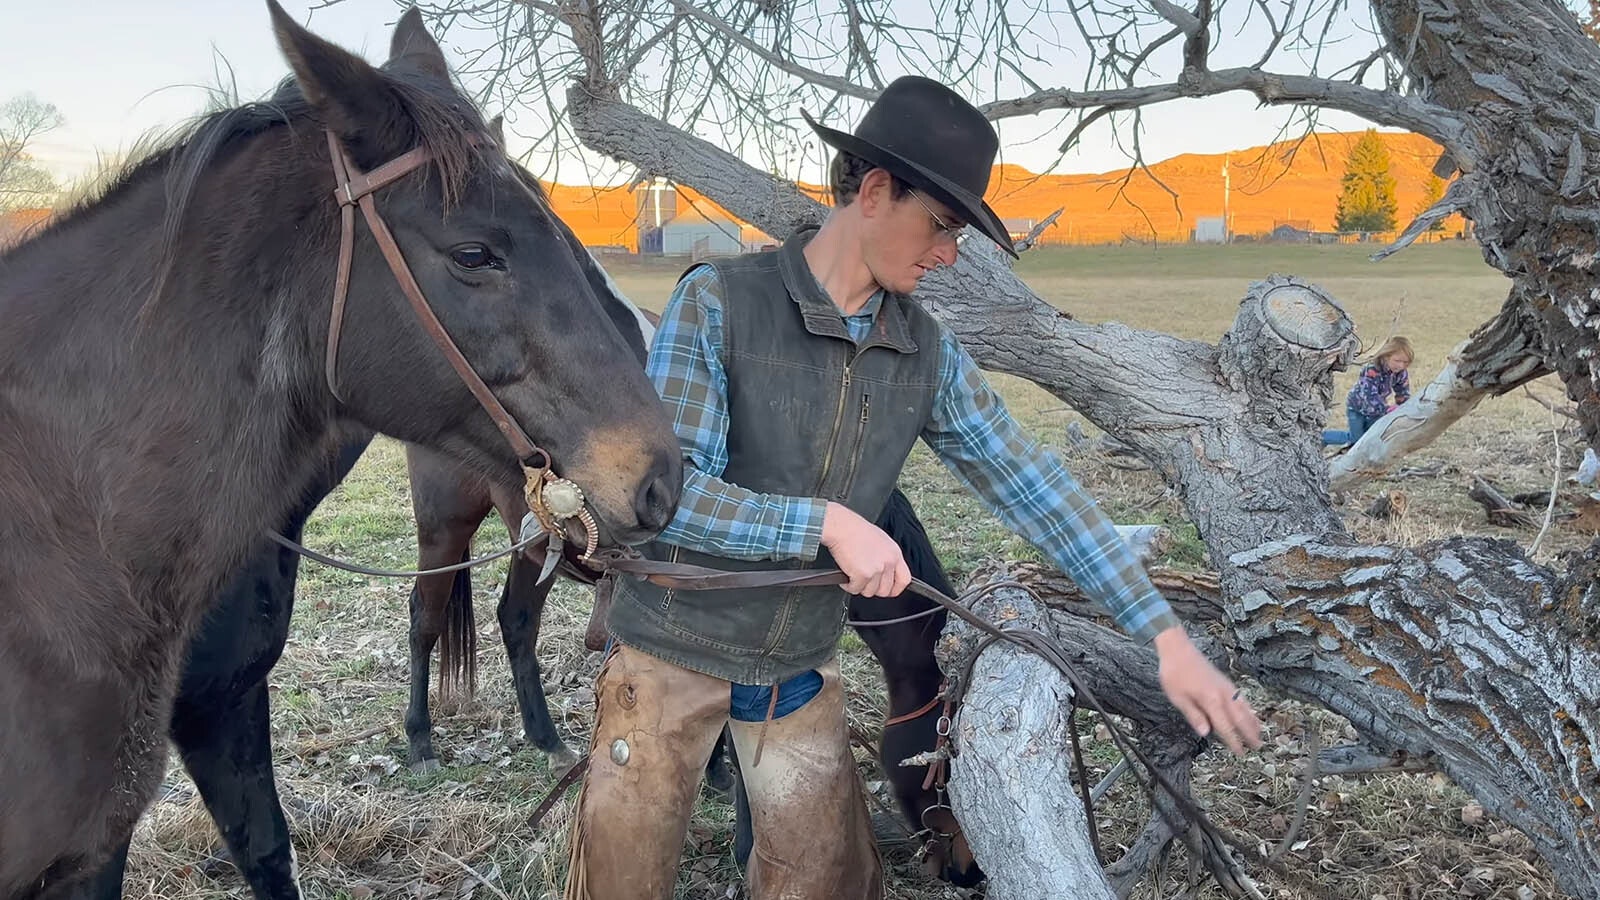 Roping, riding and wrangling are all daily tools on Peter Burgess' Wyoming ranch.